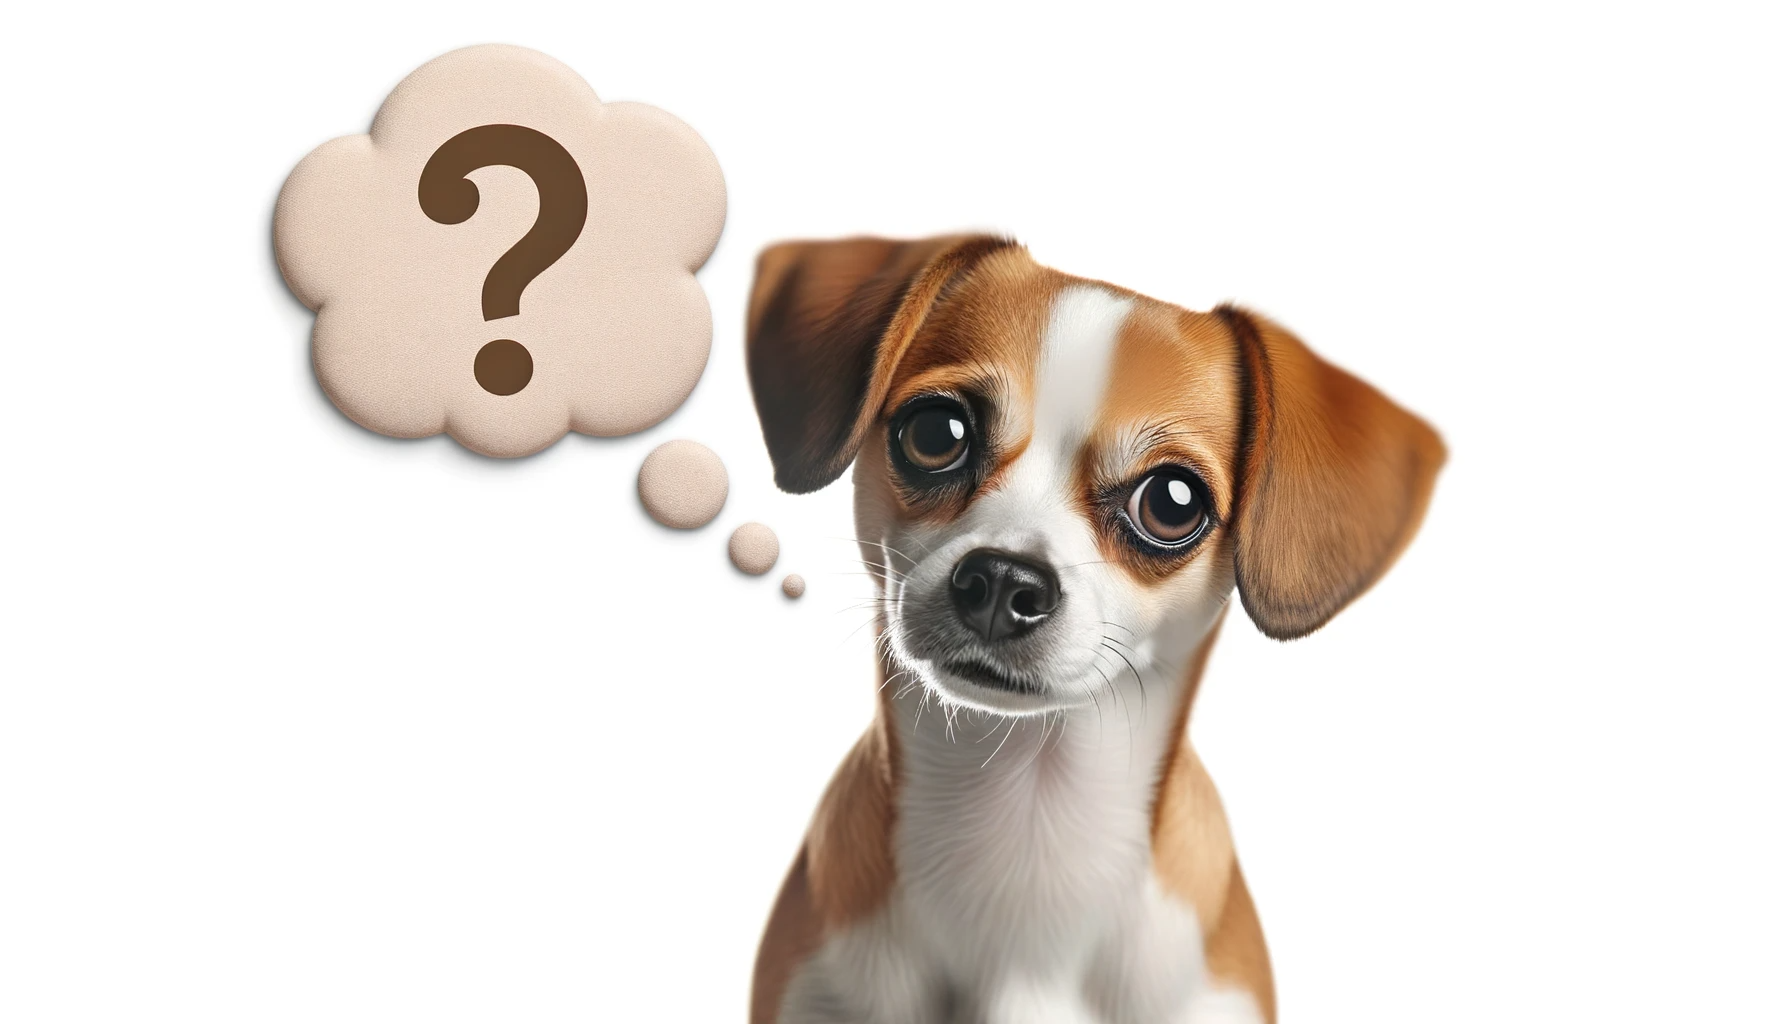 A curious Labrahuahua with a thought bubble containing a question mark, symbolizing the questions you might have